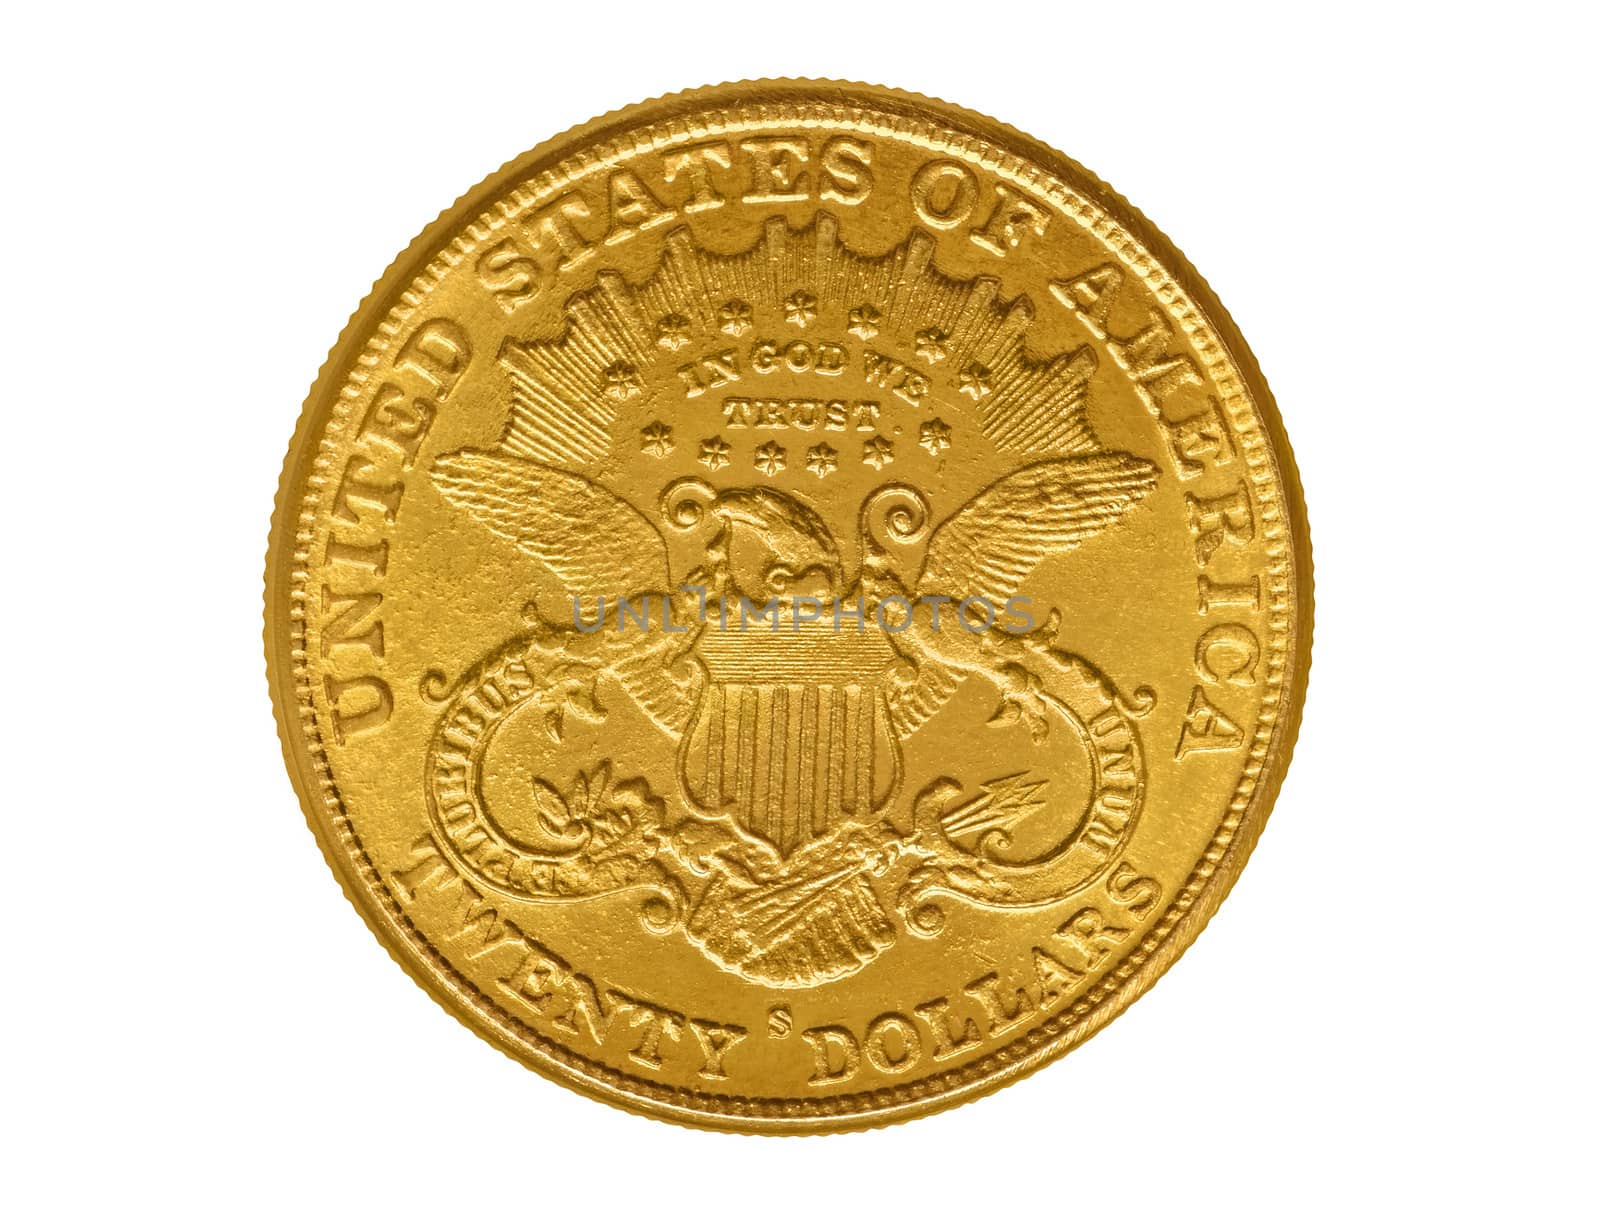 Twenty dollars gold coin from 1882 by Vectorex